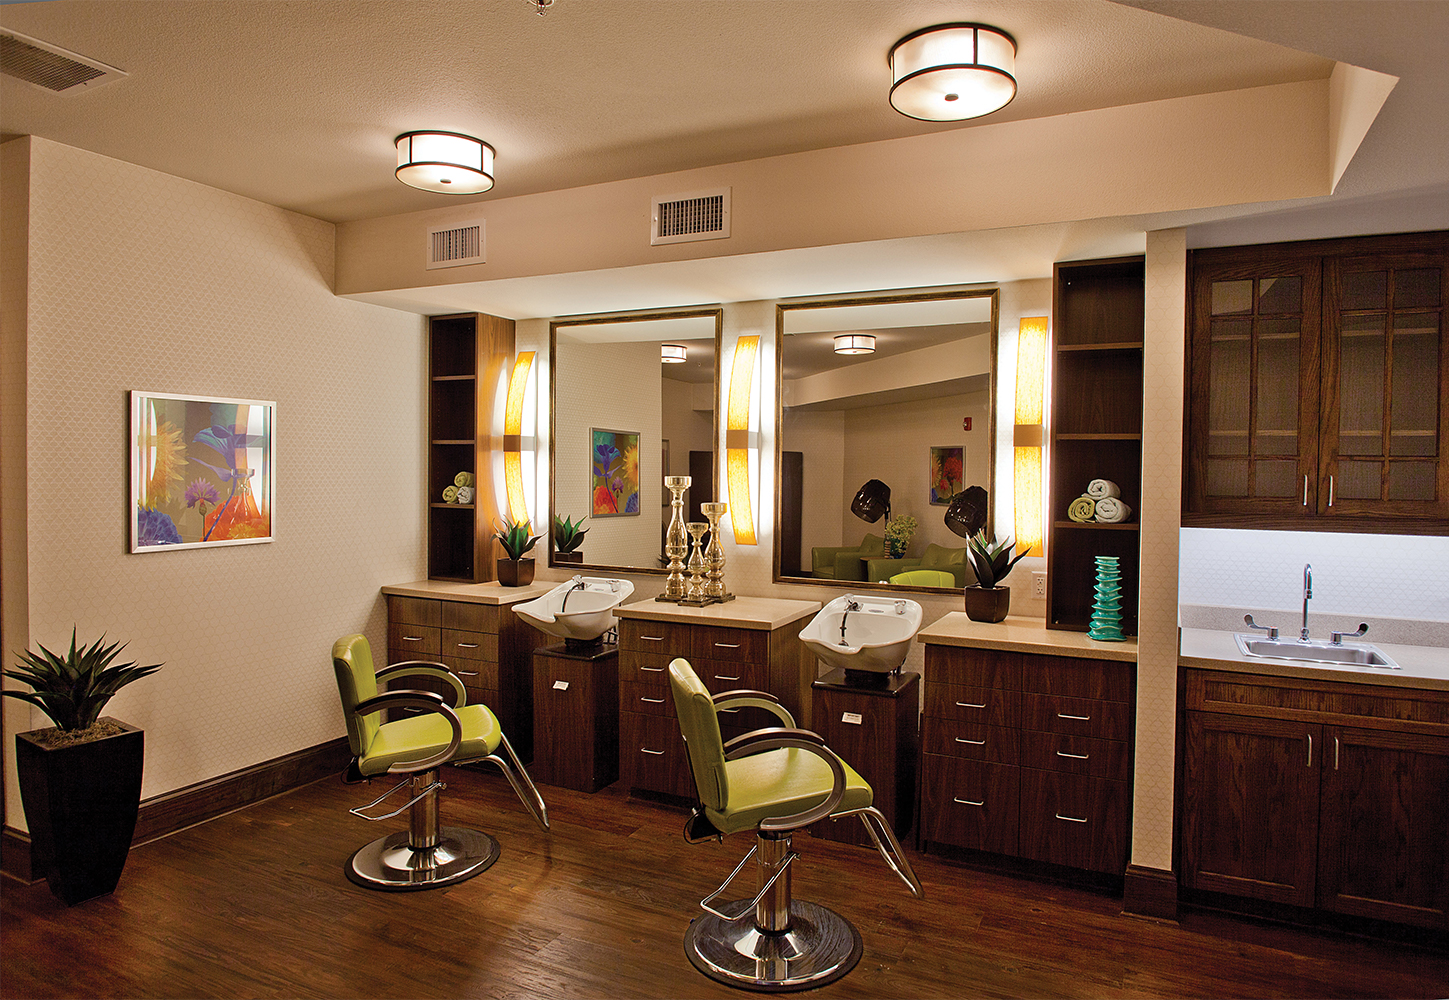 Bowe as a pleasing modern vanity light fixture, mounted vertically between salon mirrors, with Capitol ceiling luminaires.